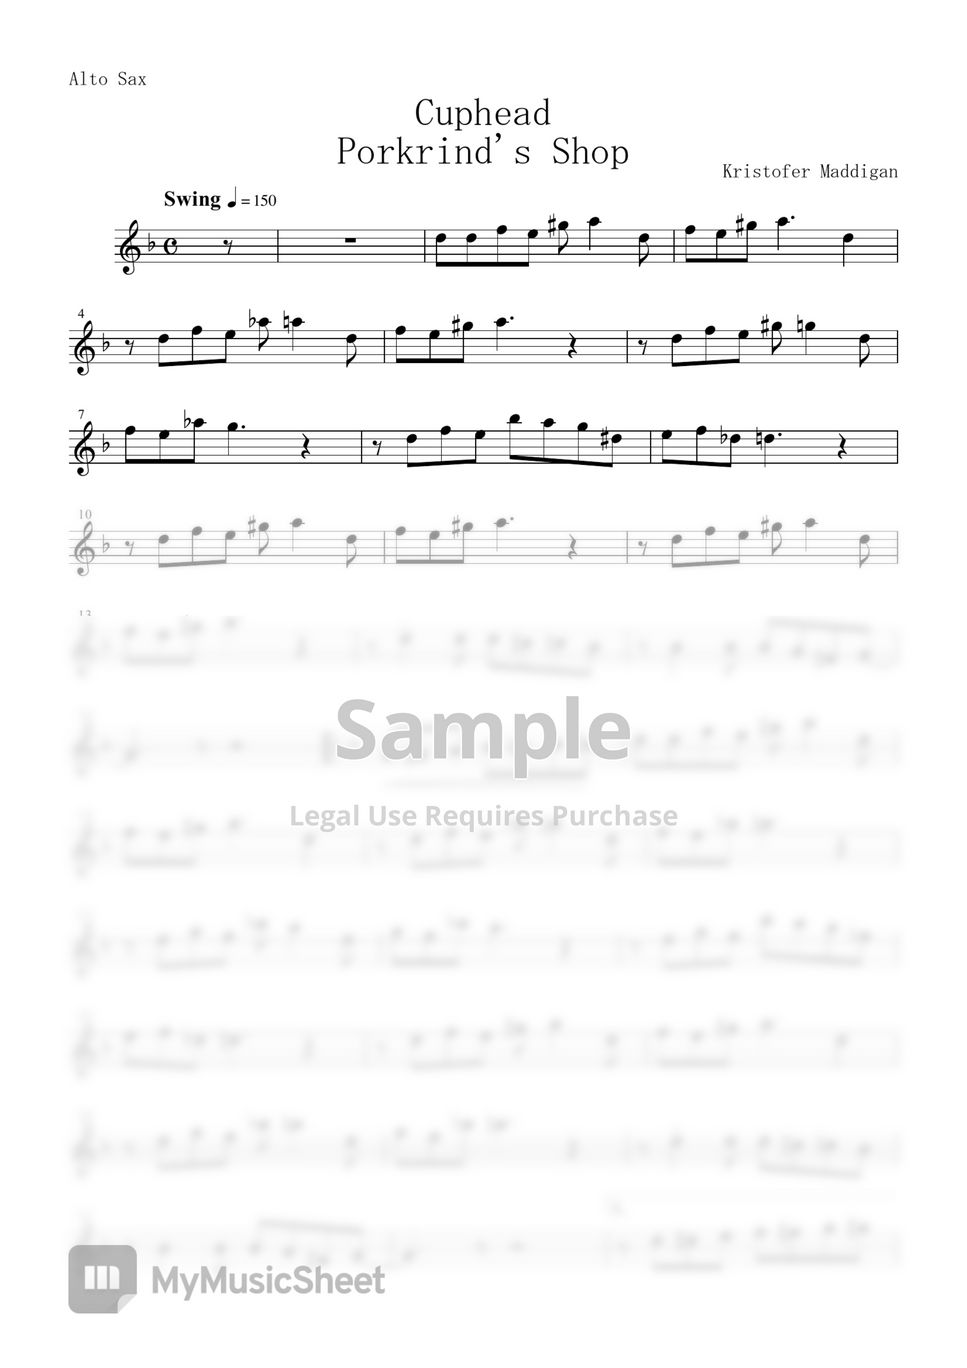 Cuphead- Die House (King Dice) Sheet music for Piano, Saxophone alto,  Saxophone tenor, Guitar & more instruments (Mixed Ensemble)